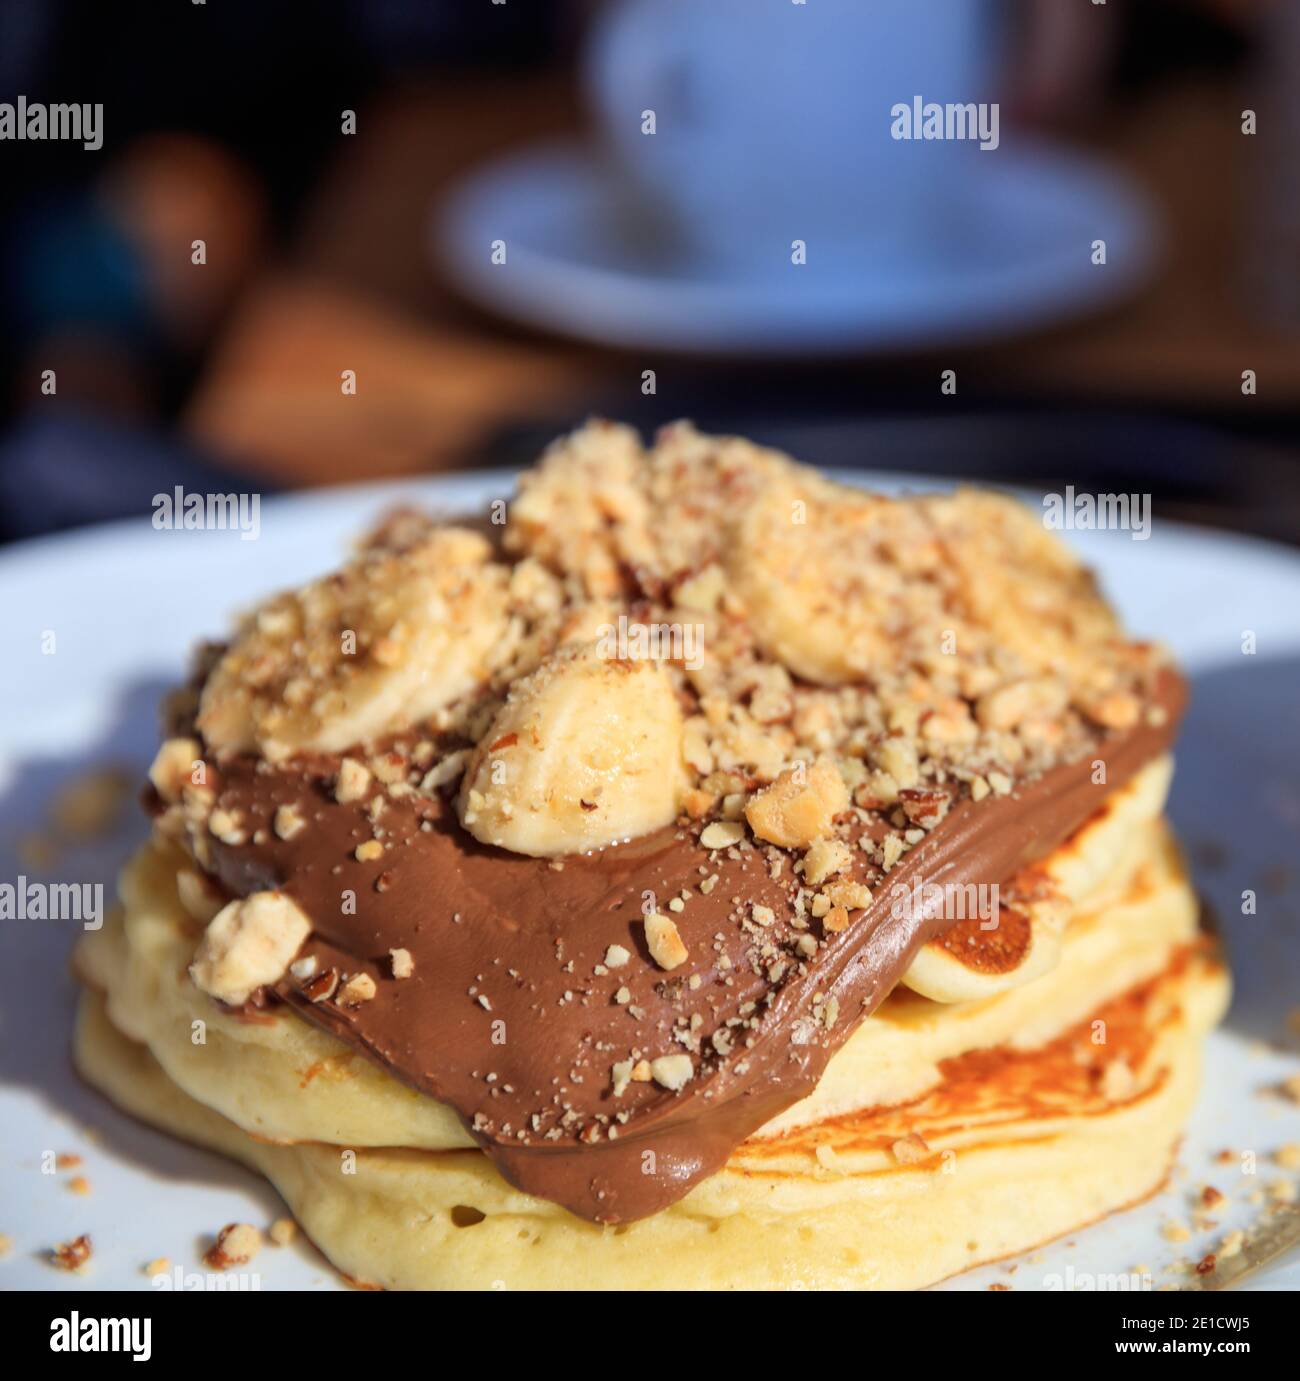 Pancakes with chocolate sauce on a white plate. Traditional American breakfast. Heap of fresh baked hot pastry with cocoa cream, fruits, walnuts. Blur Stock Photo